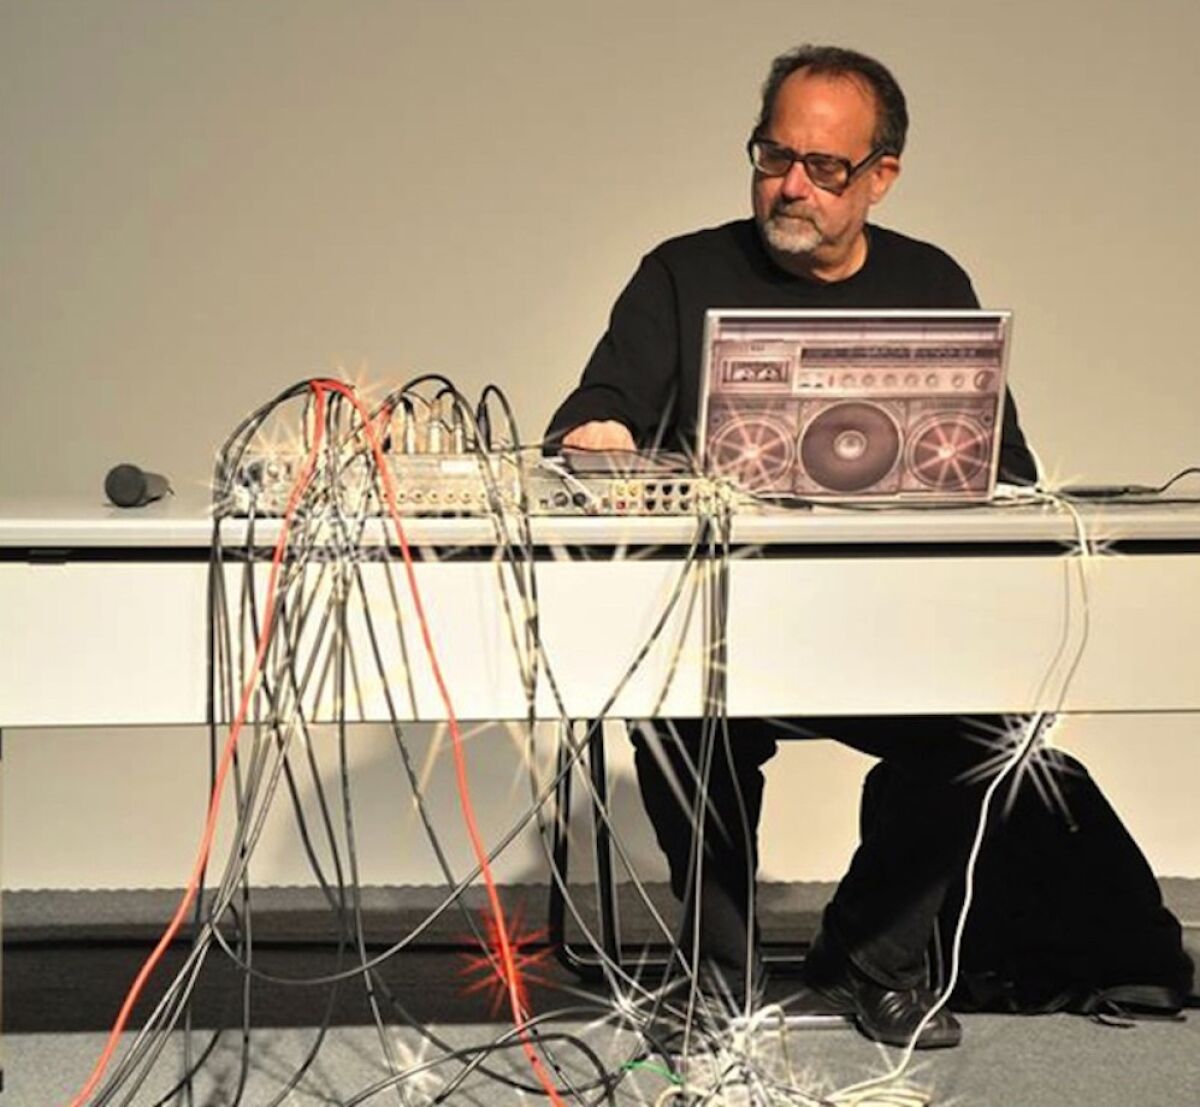 Carl Stone Concert It’s electro-acoustic music with computers in a live performance, 7:30 p.m. Sunday, Feb. 9 at White Box Live Arts, 2590 Truxton Road, Liberty Station. Tickets at the door: $20, $10 students. bit.ly/carlstonemusic